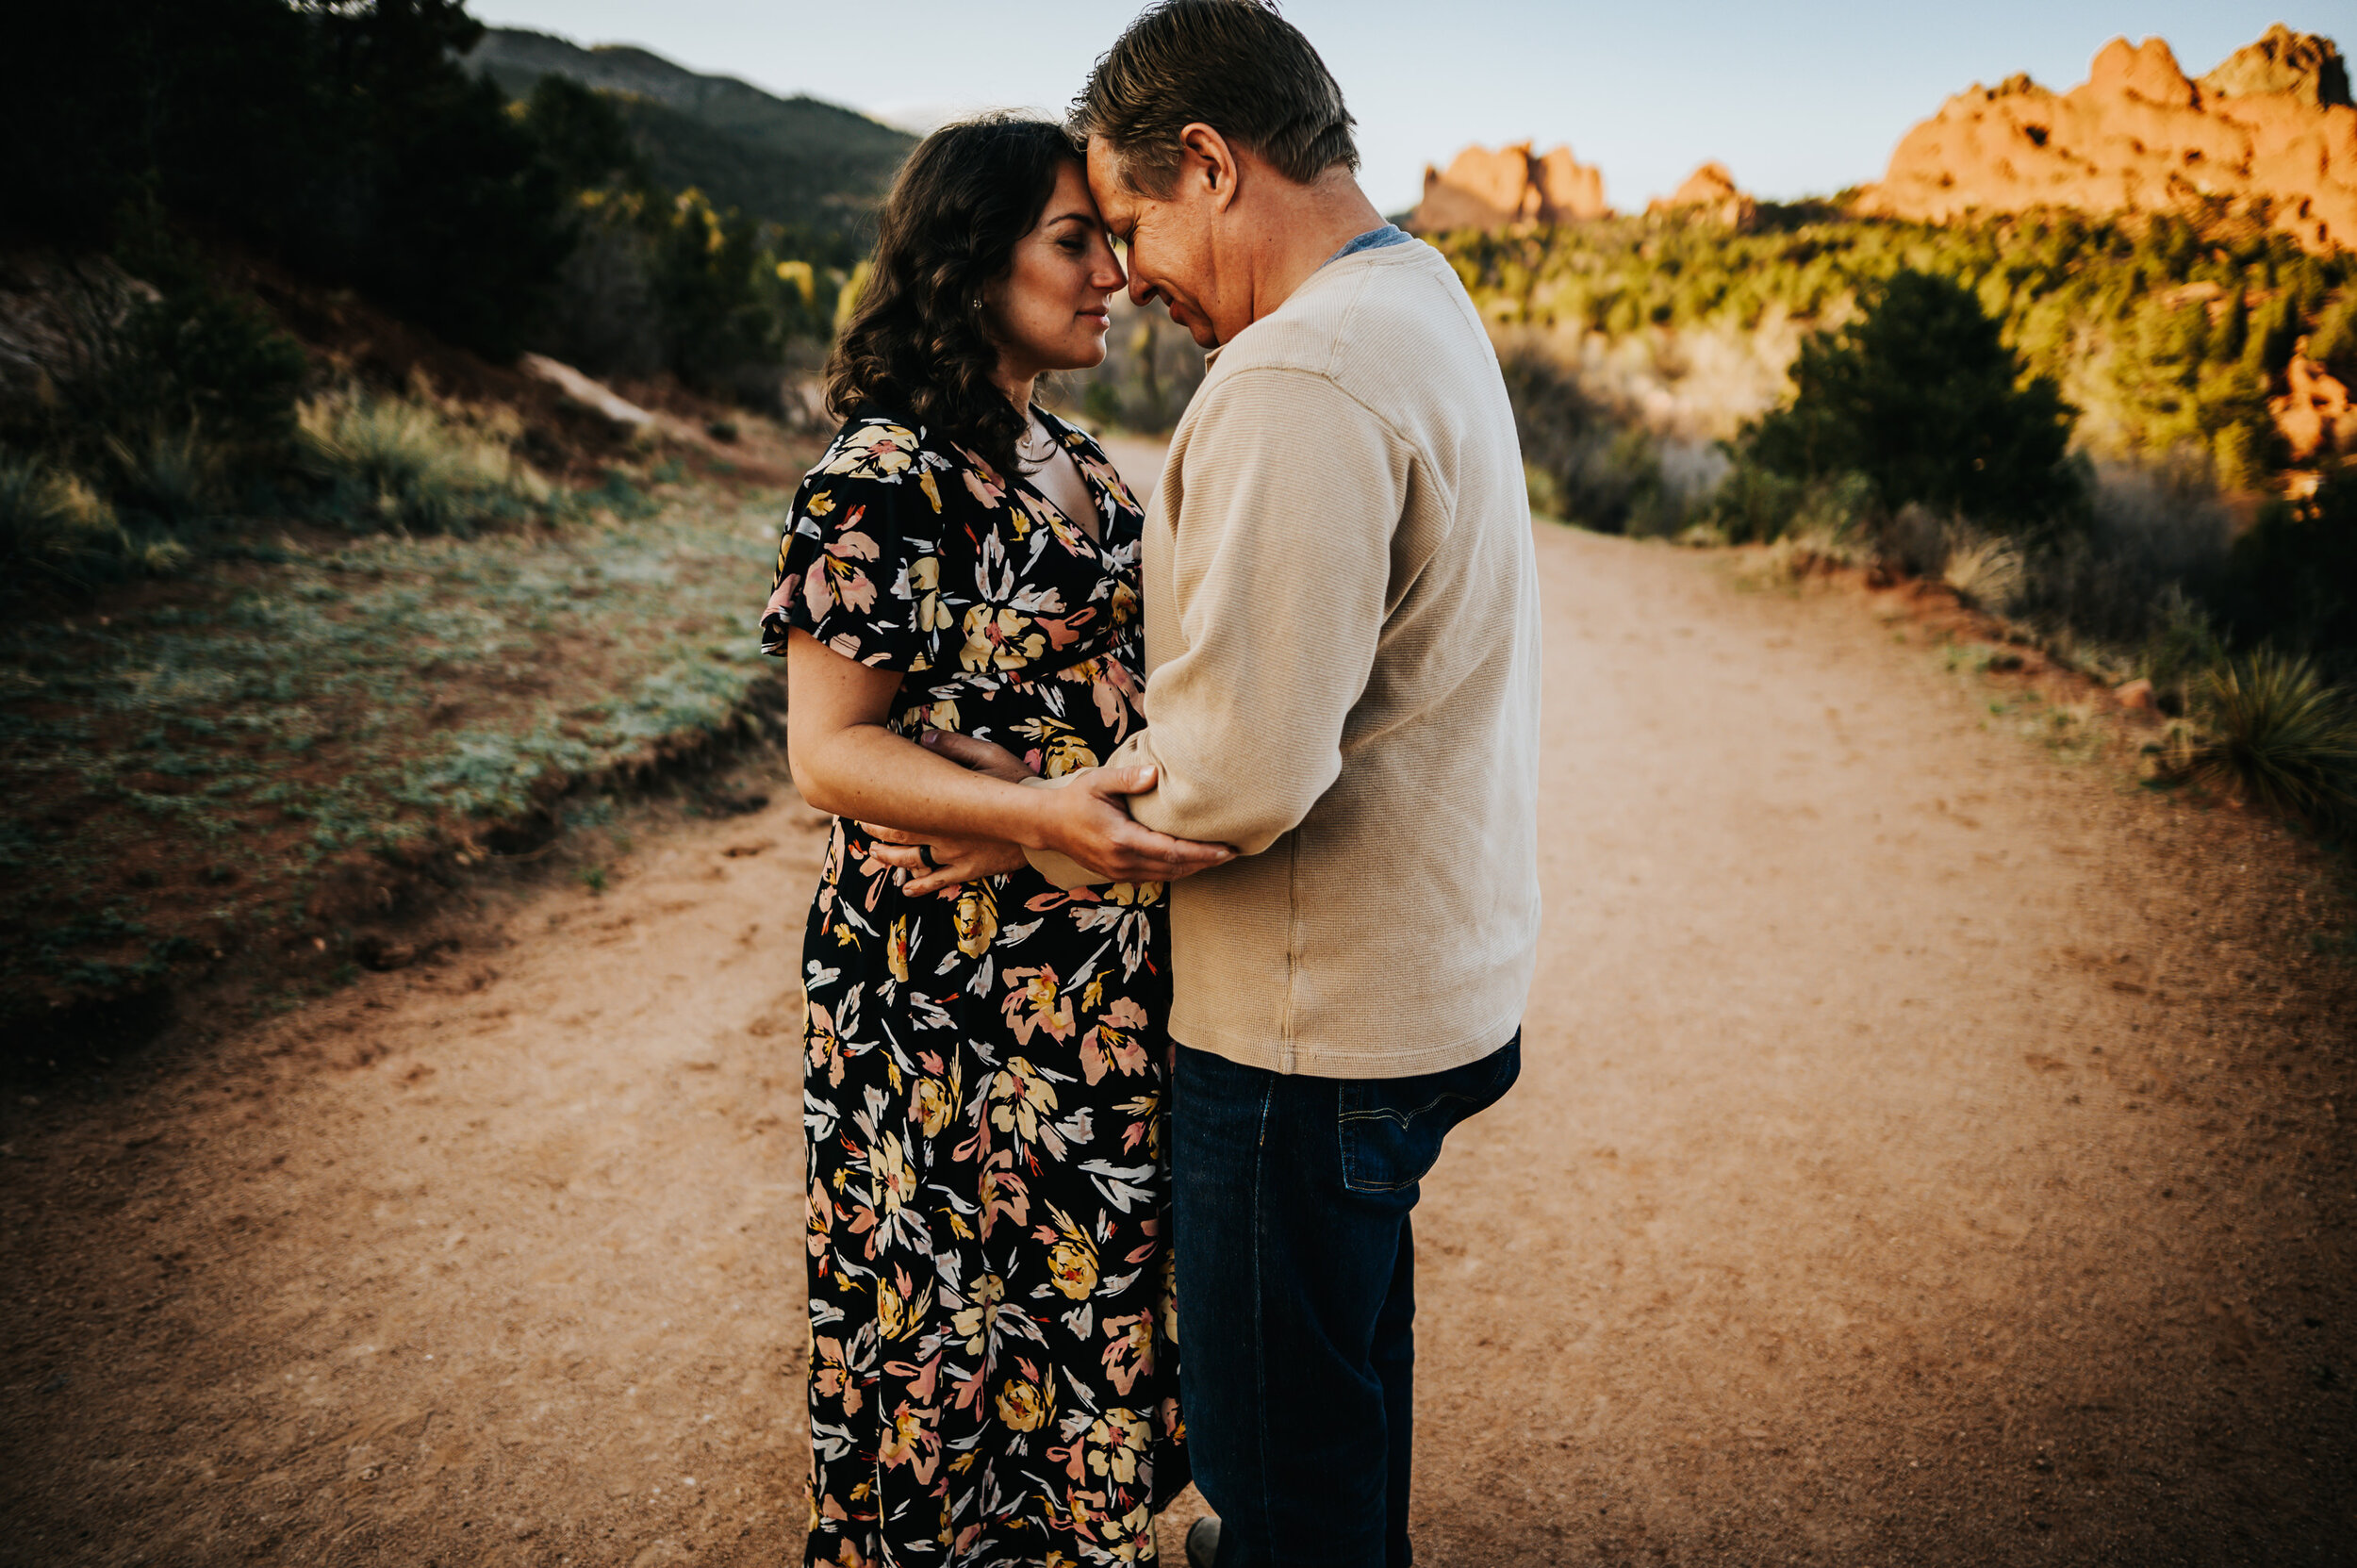 Andrea Grimm Maternity Family Session Colorado Springs Sunset Garden of the Gods Wild Prairie Photography-10-2020.jpg